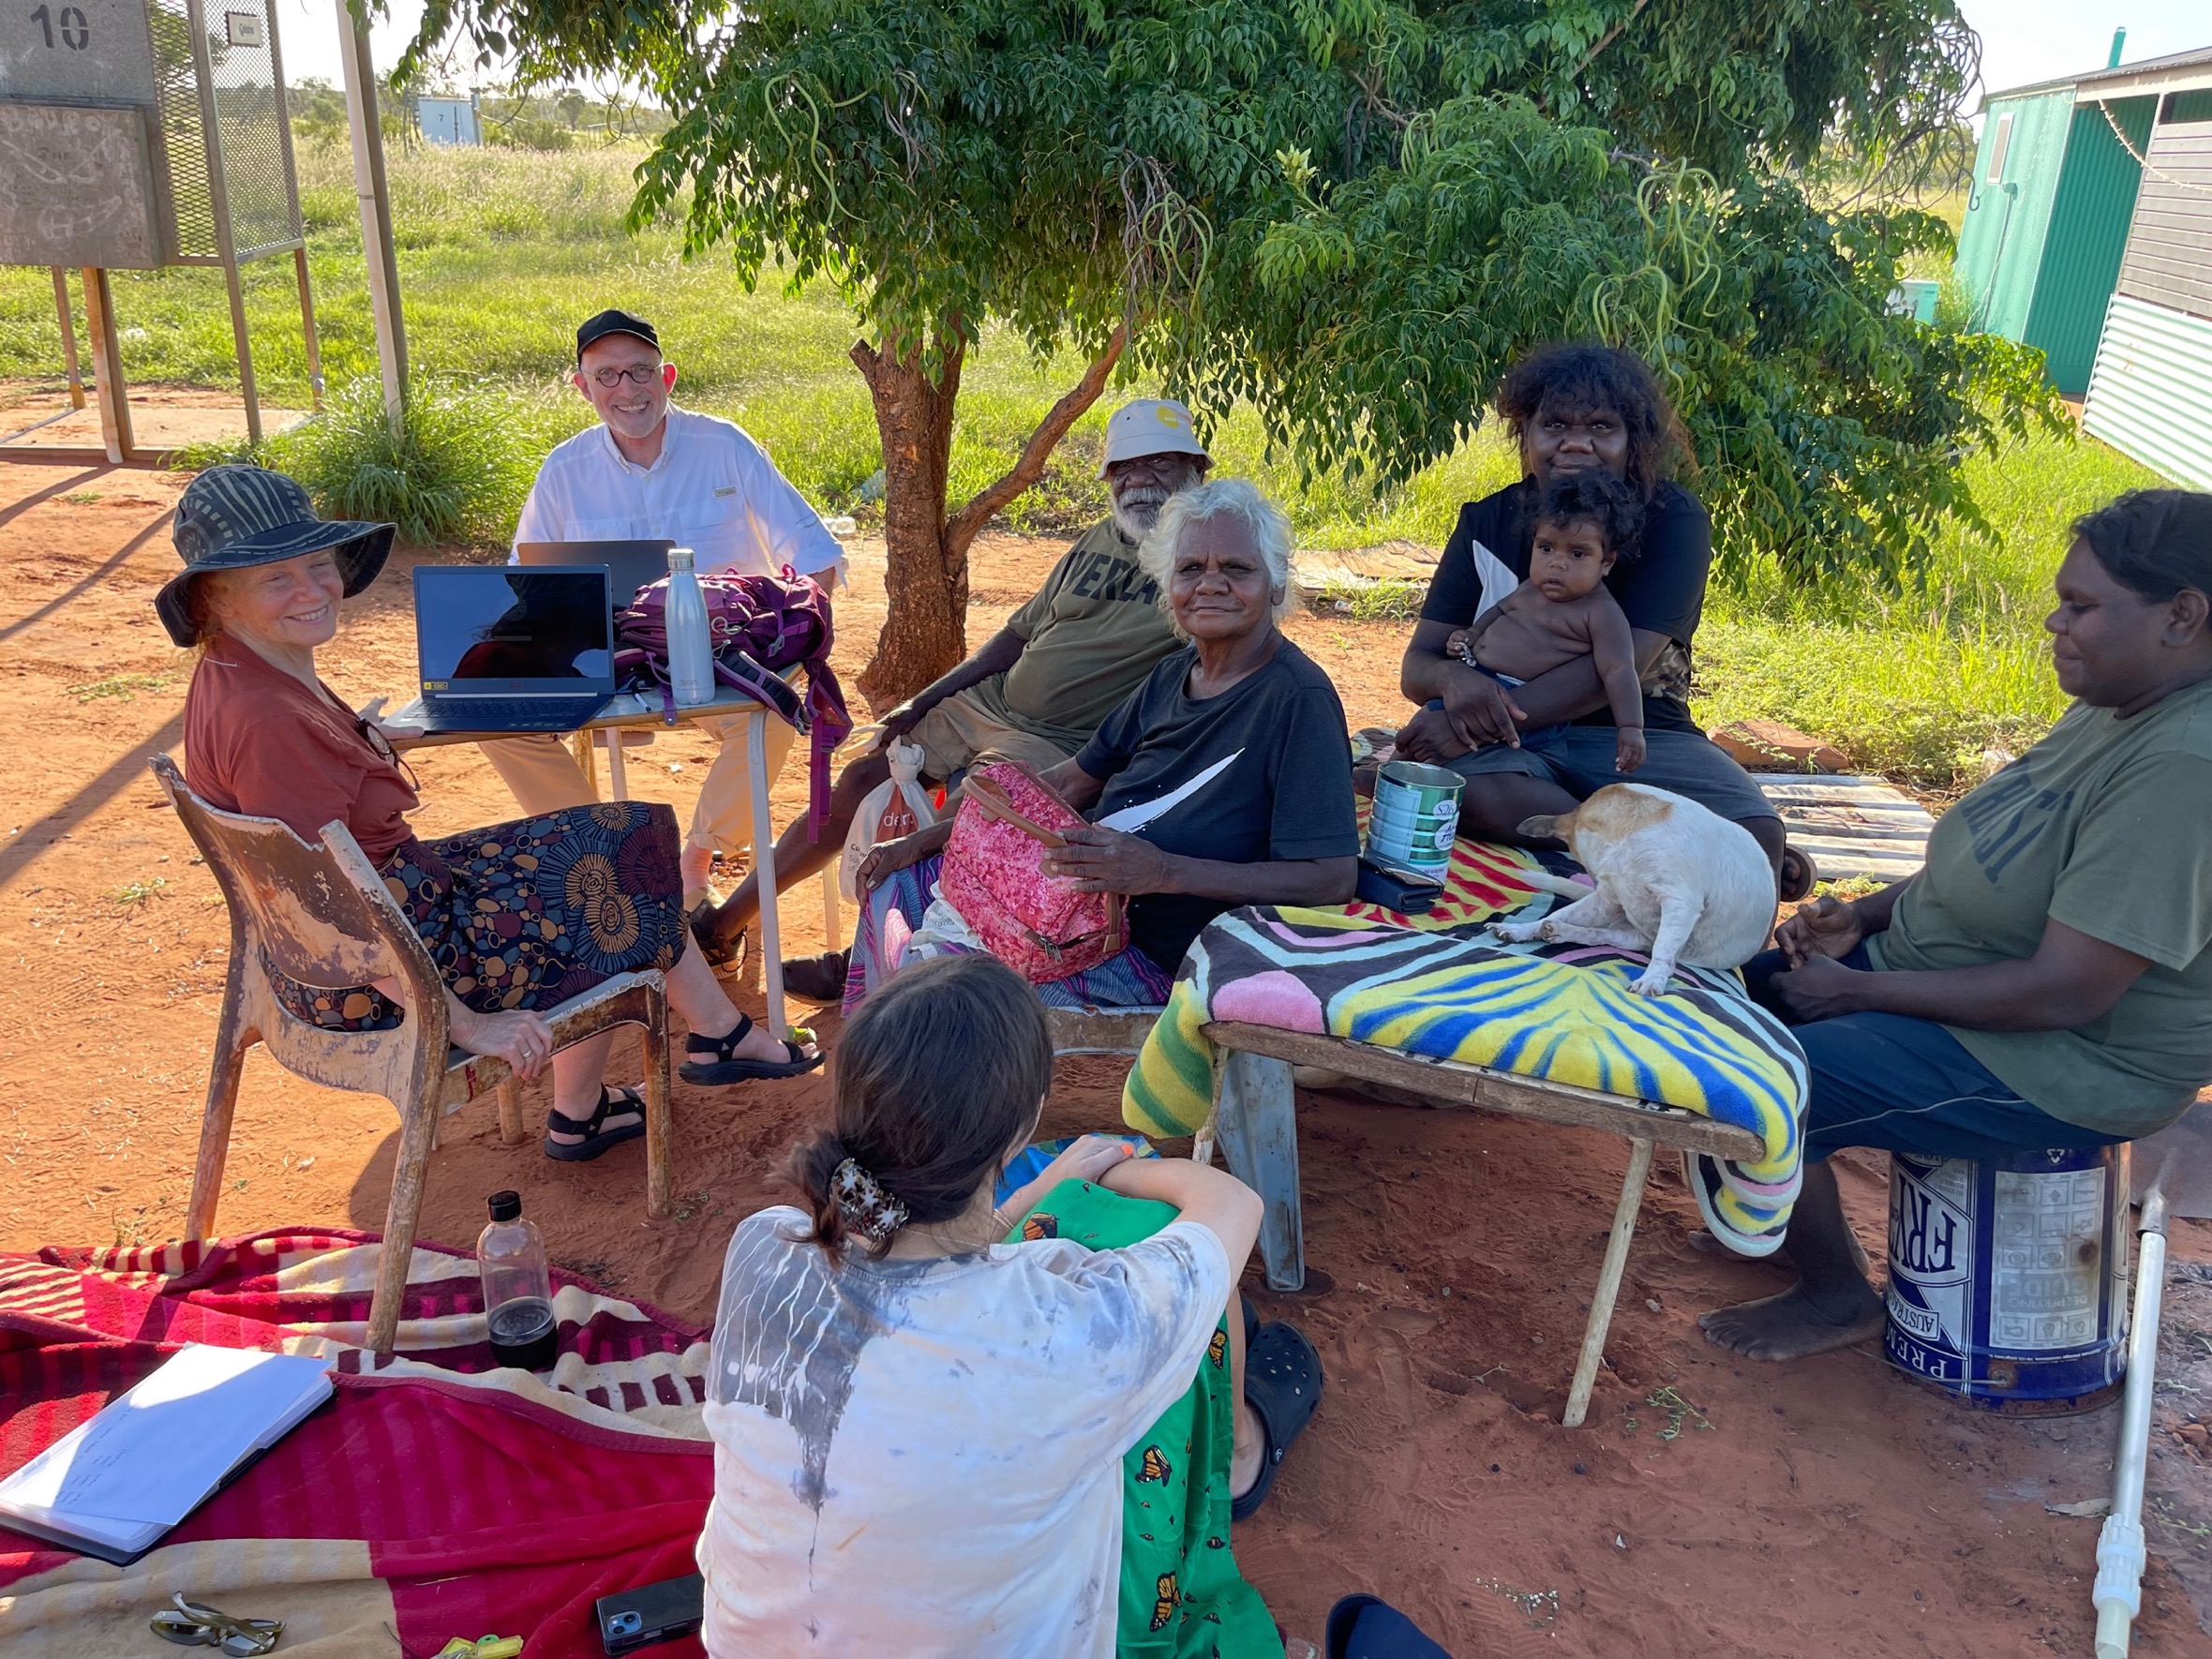 Arts Law's former CEO Robyn Ayres and volunteer solicitor Shane Simpson working with a group of Aboriginal artists outside.